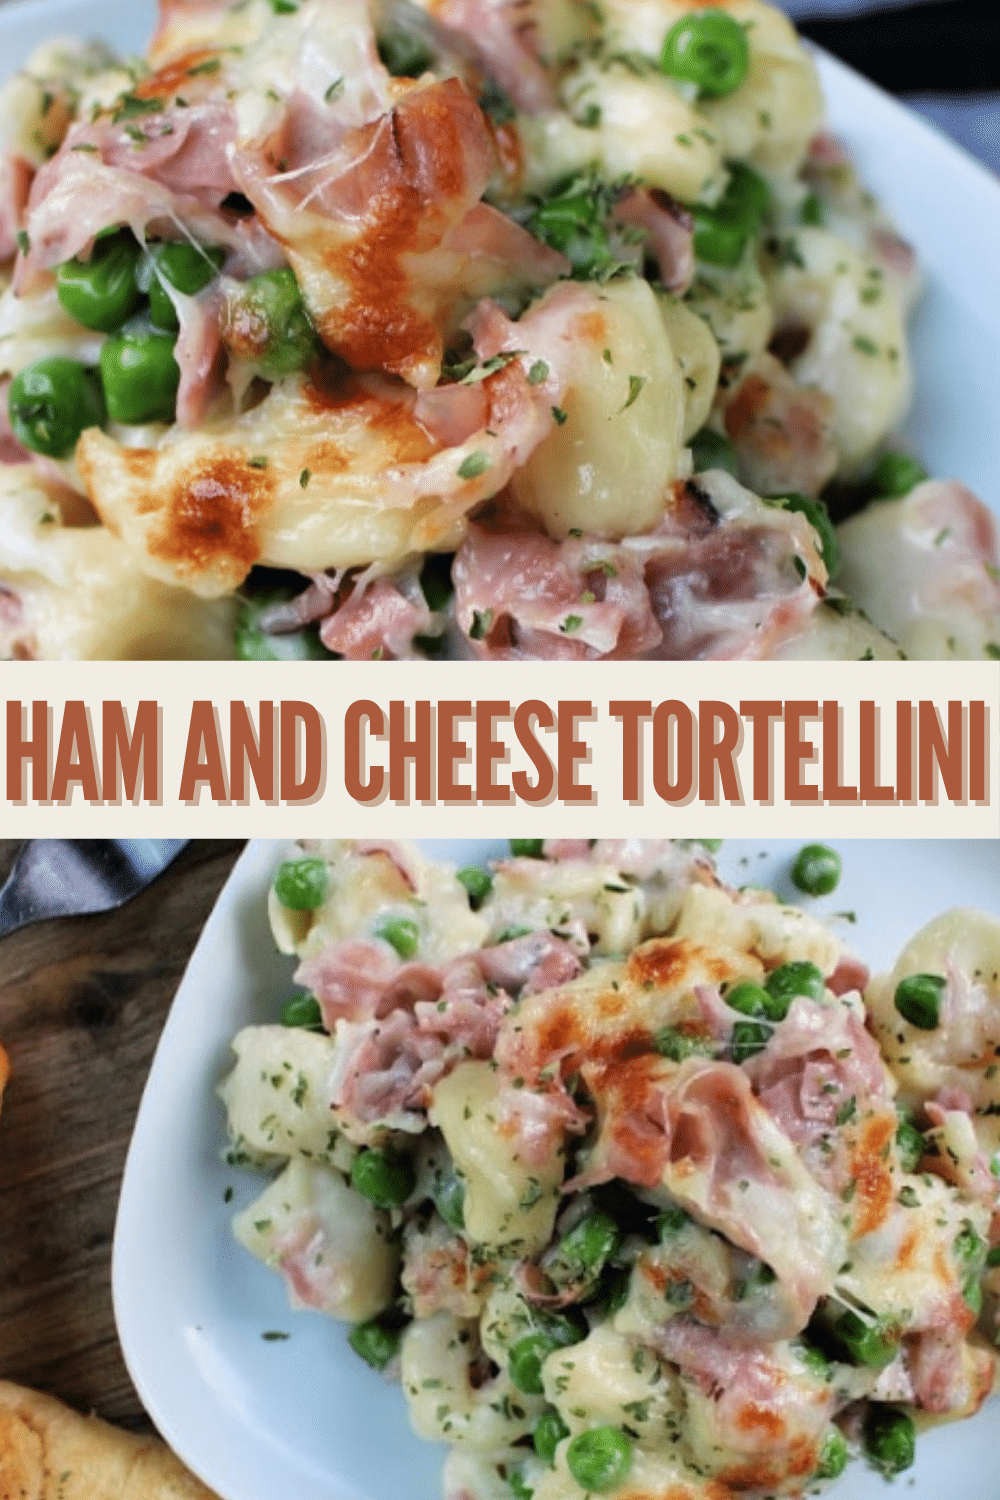 This family-friendly Ham and Cheese Tortellini casserole dinner recipe is quick and easy to make. This flavorful dish will become a family favorite. #tortellini #ham #easydinnerideas via @wondermomwannab